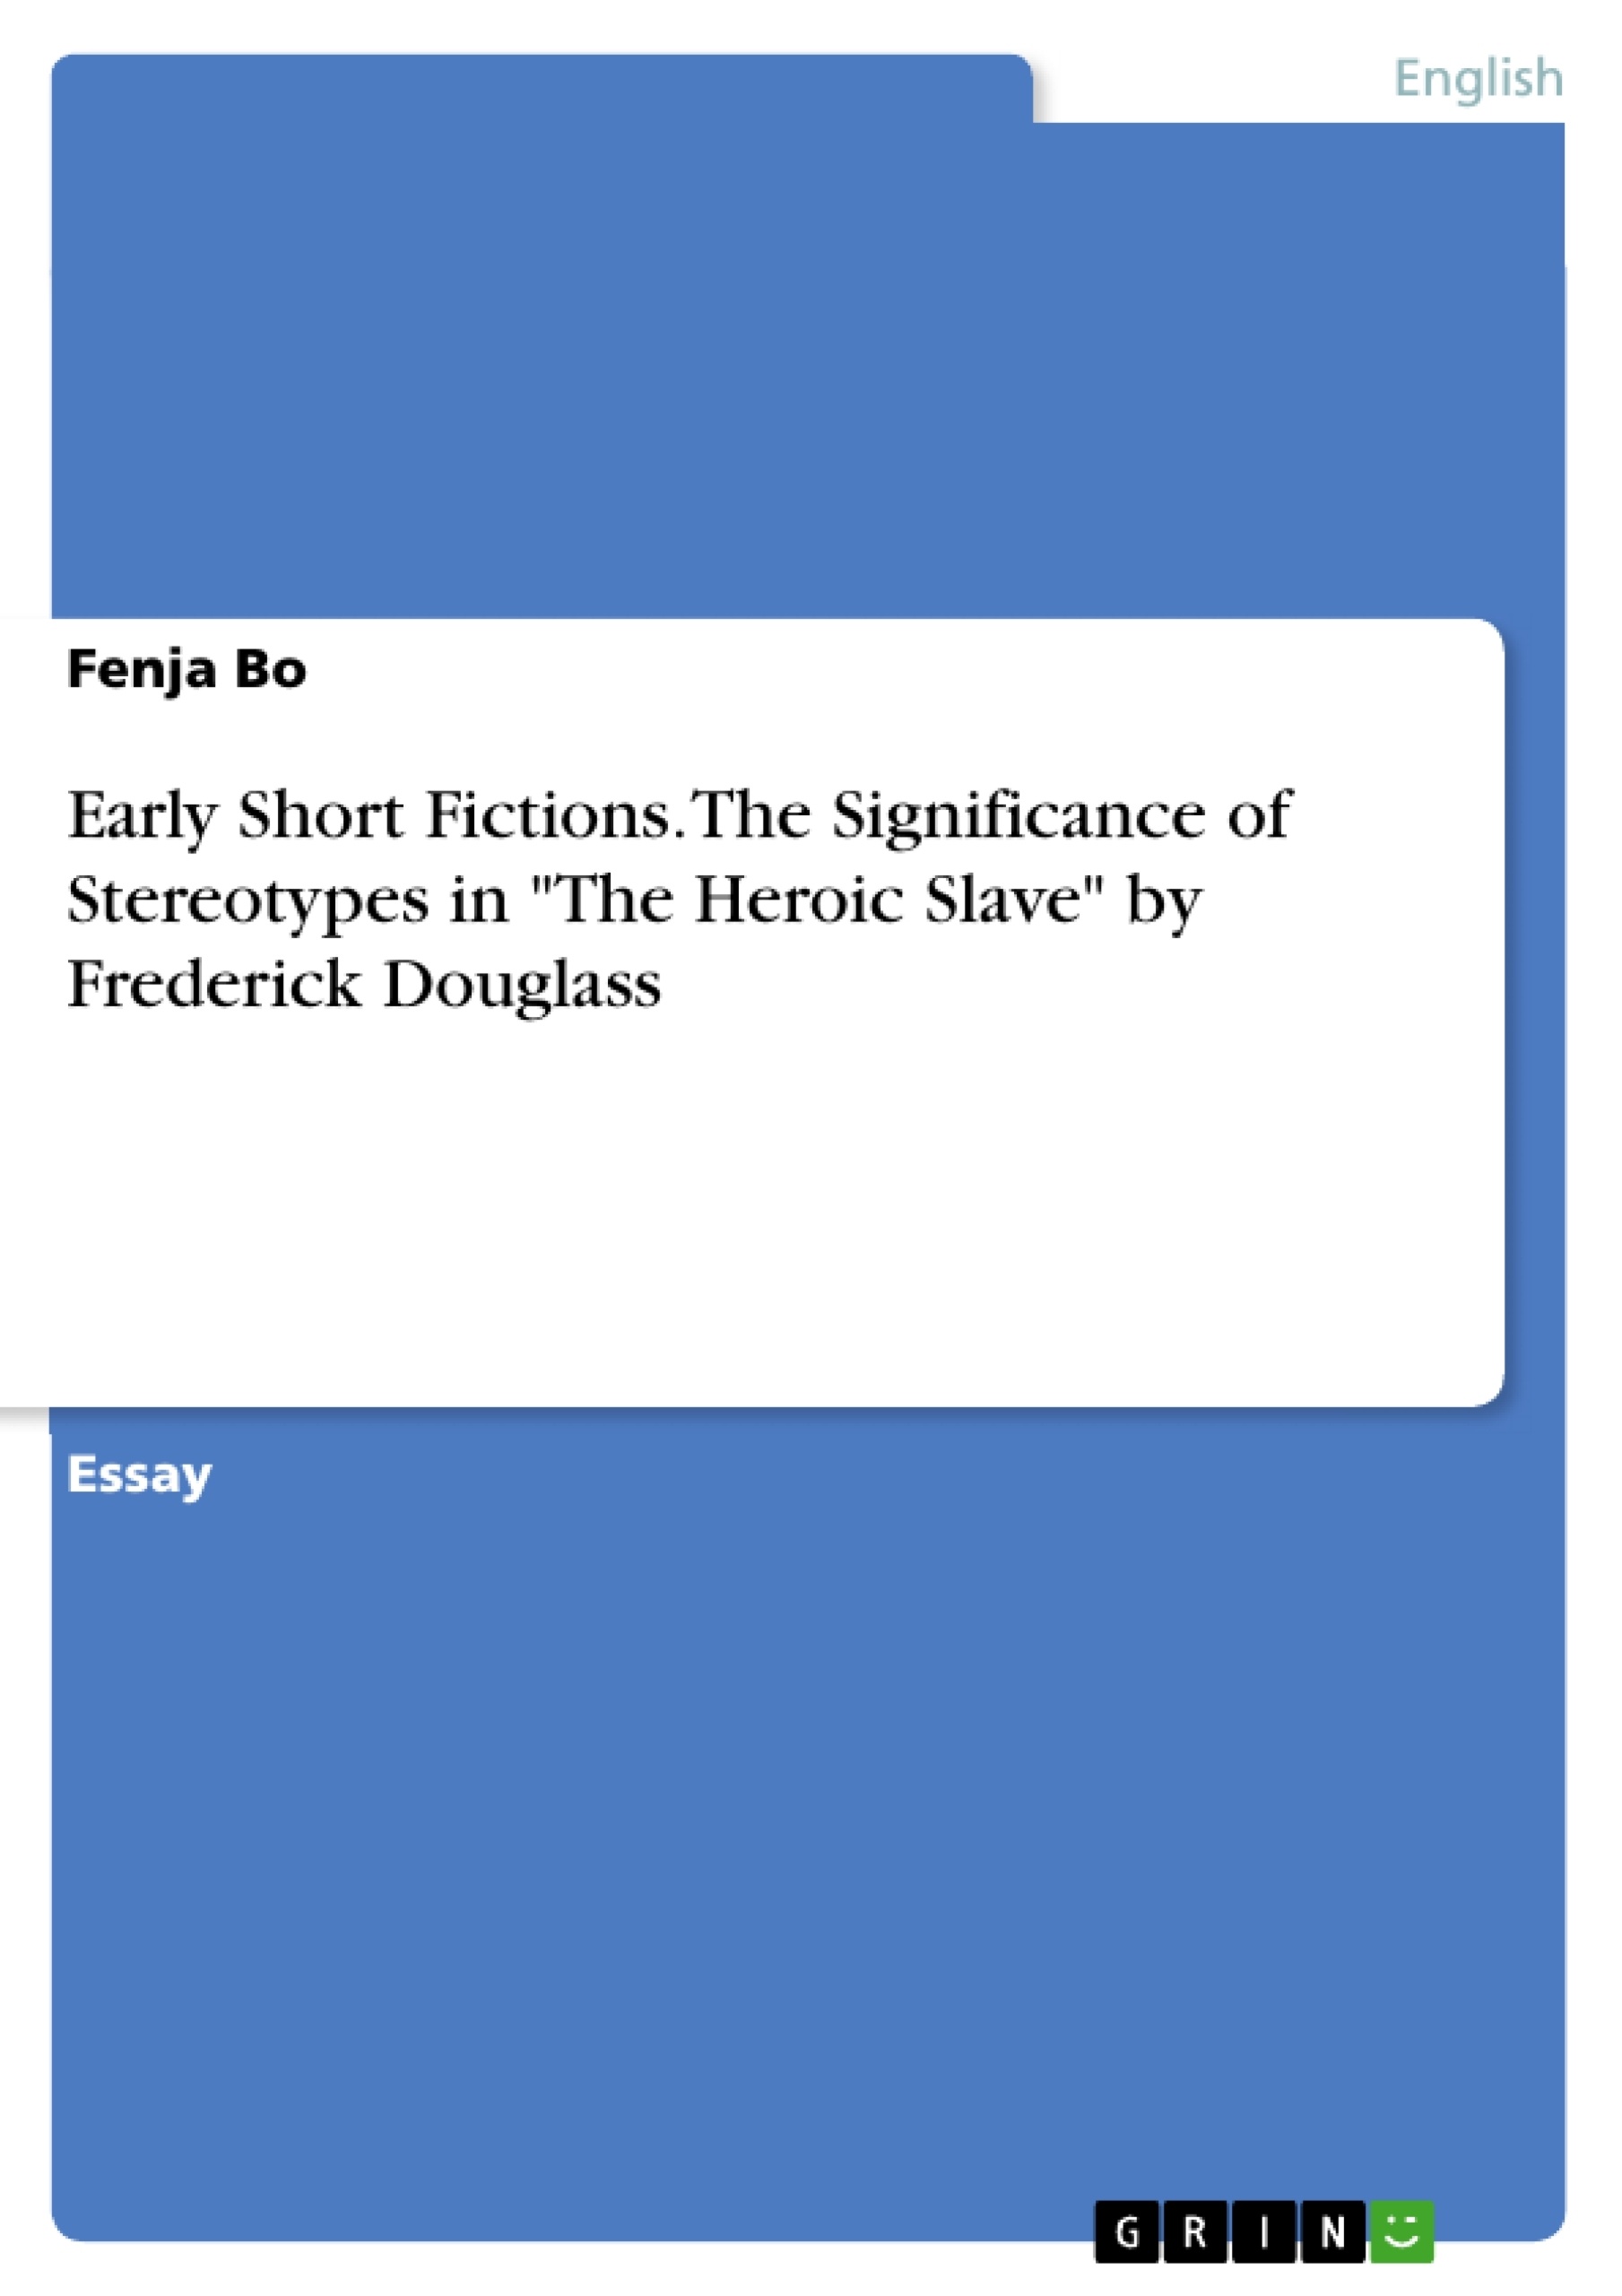 Title: Early Short Fictions. The Significance of Stereotypes in "The Heroic Slave" by Frederick Douglass